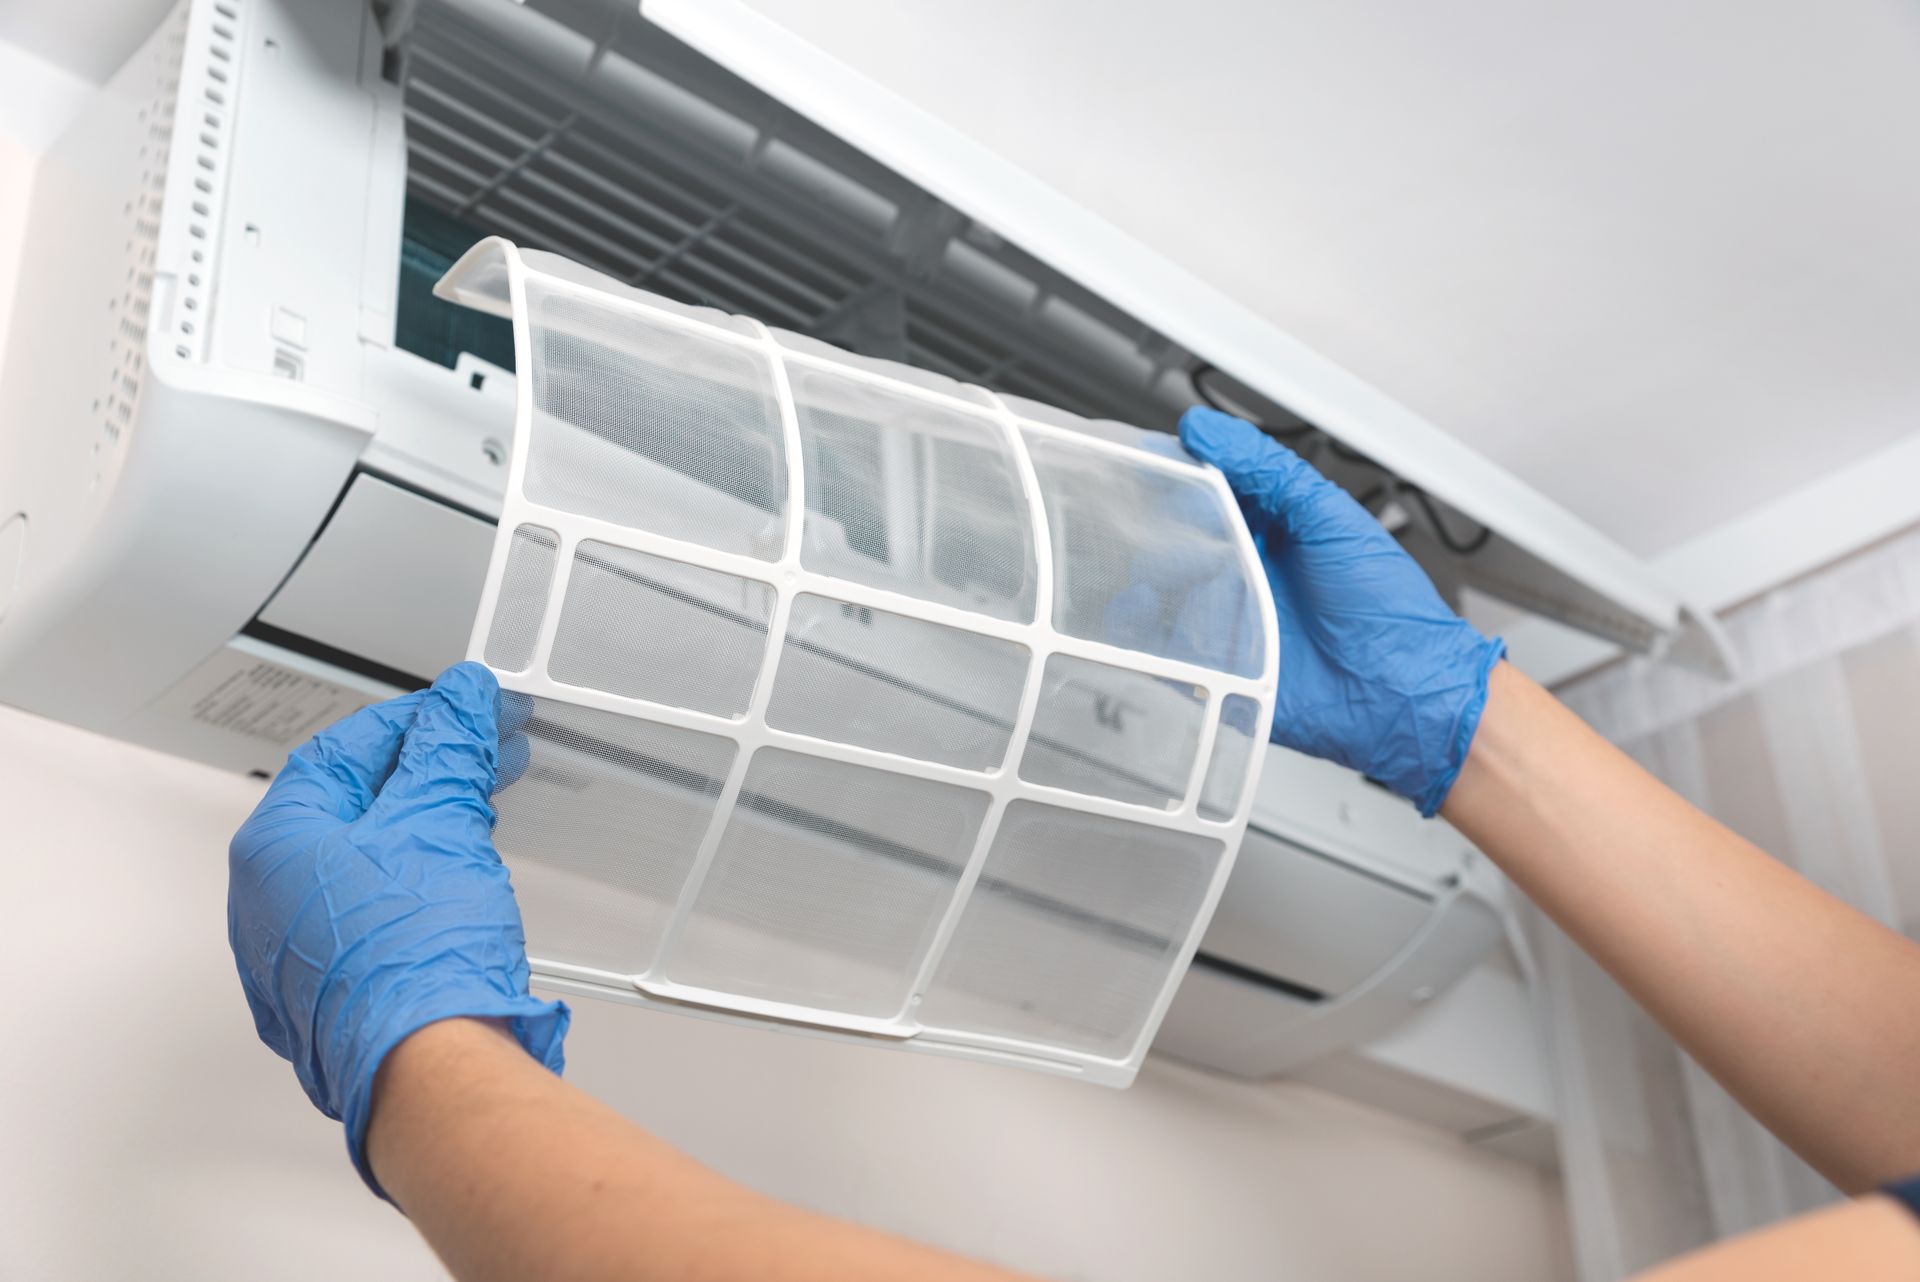 a person wearing blue gloves is cleaning an air conditioner .